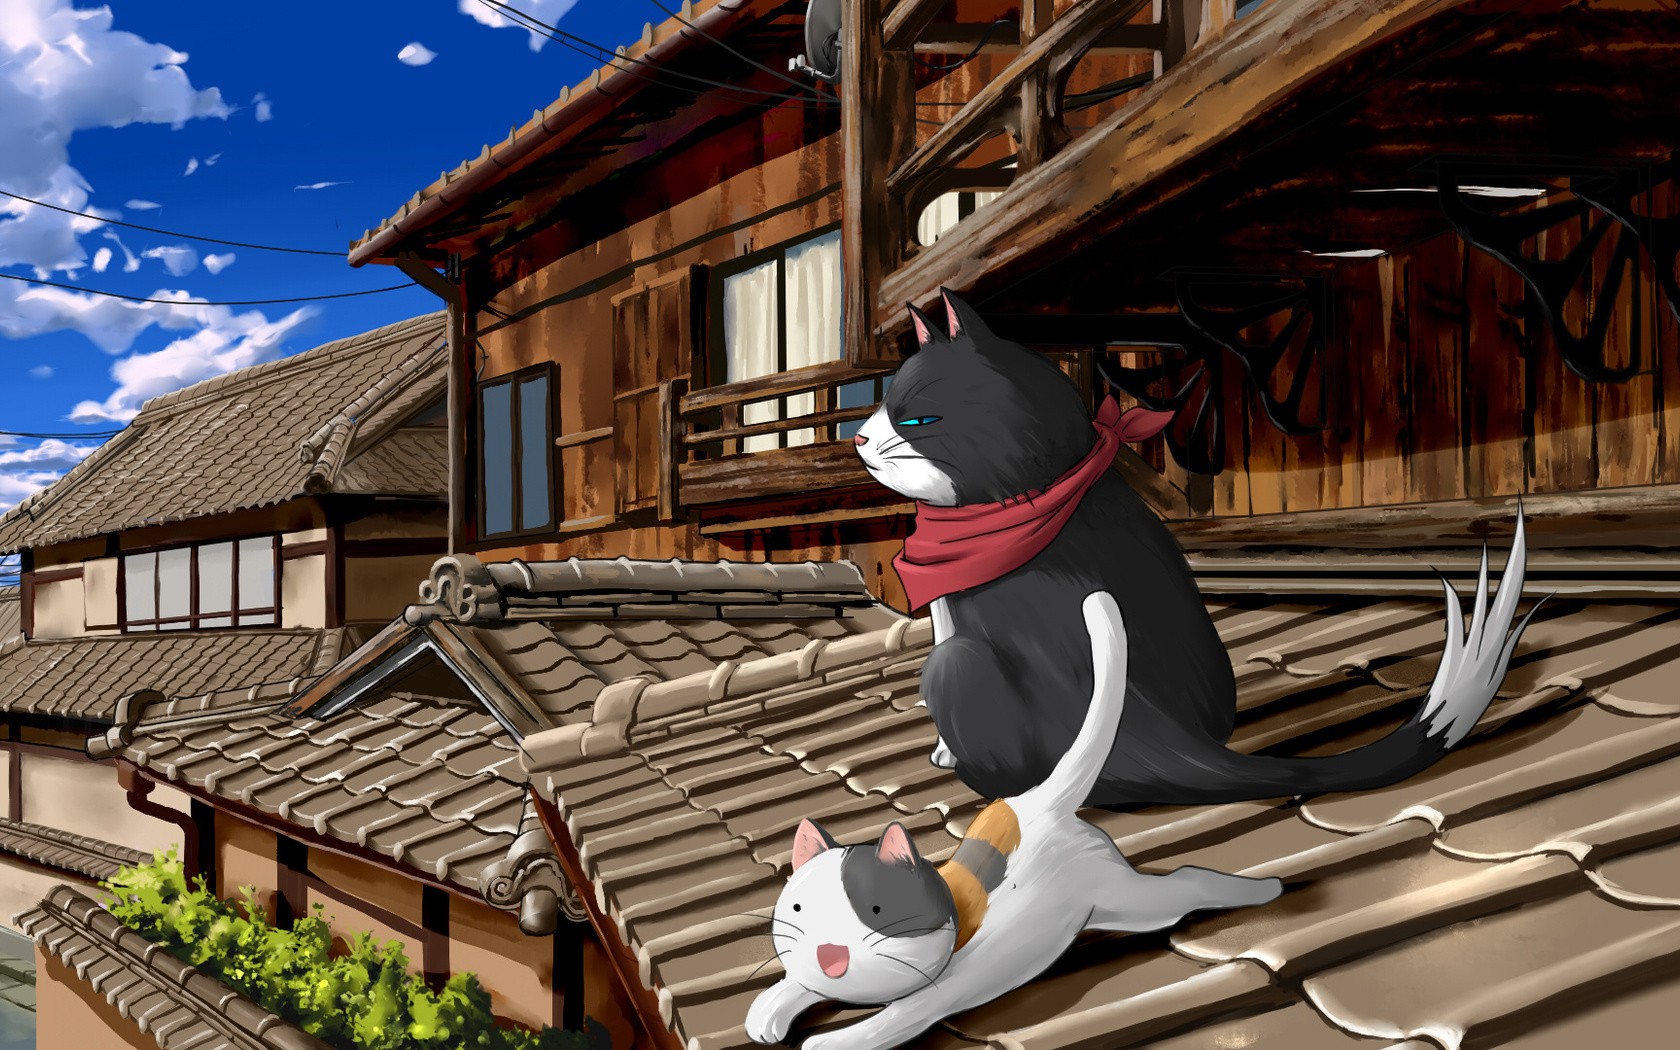 Anime 1680x1050 anime cats rooftops house animals